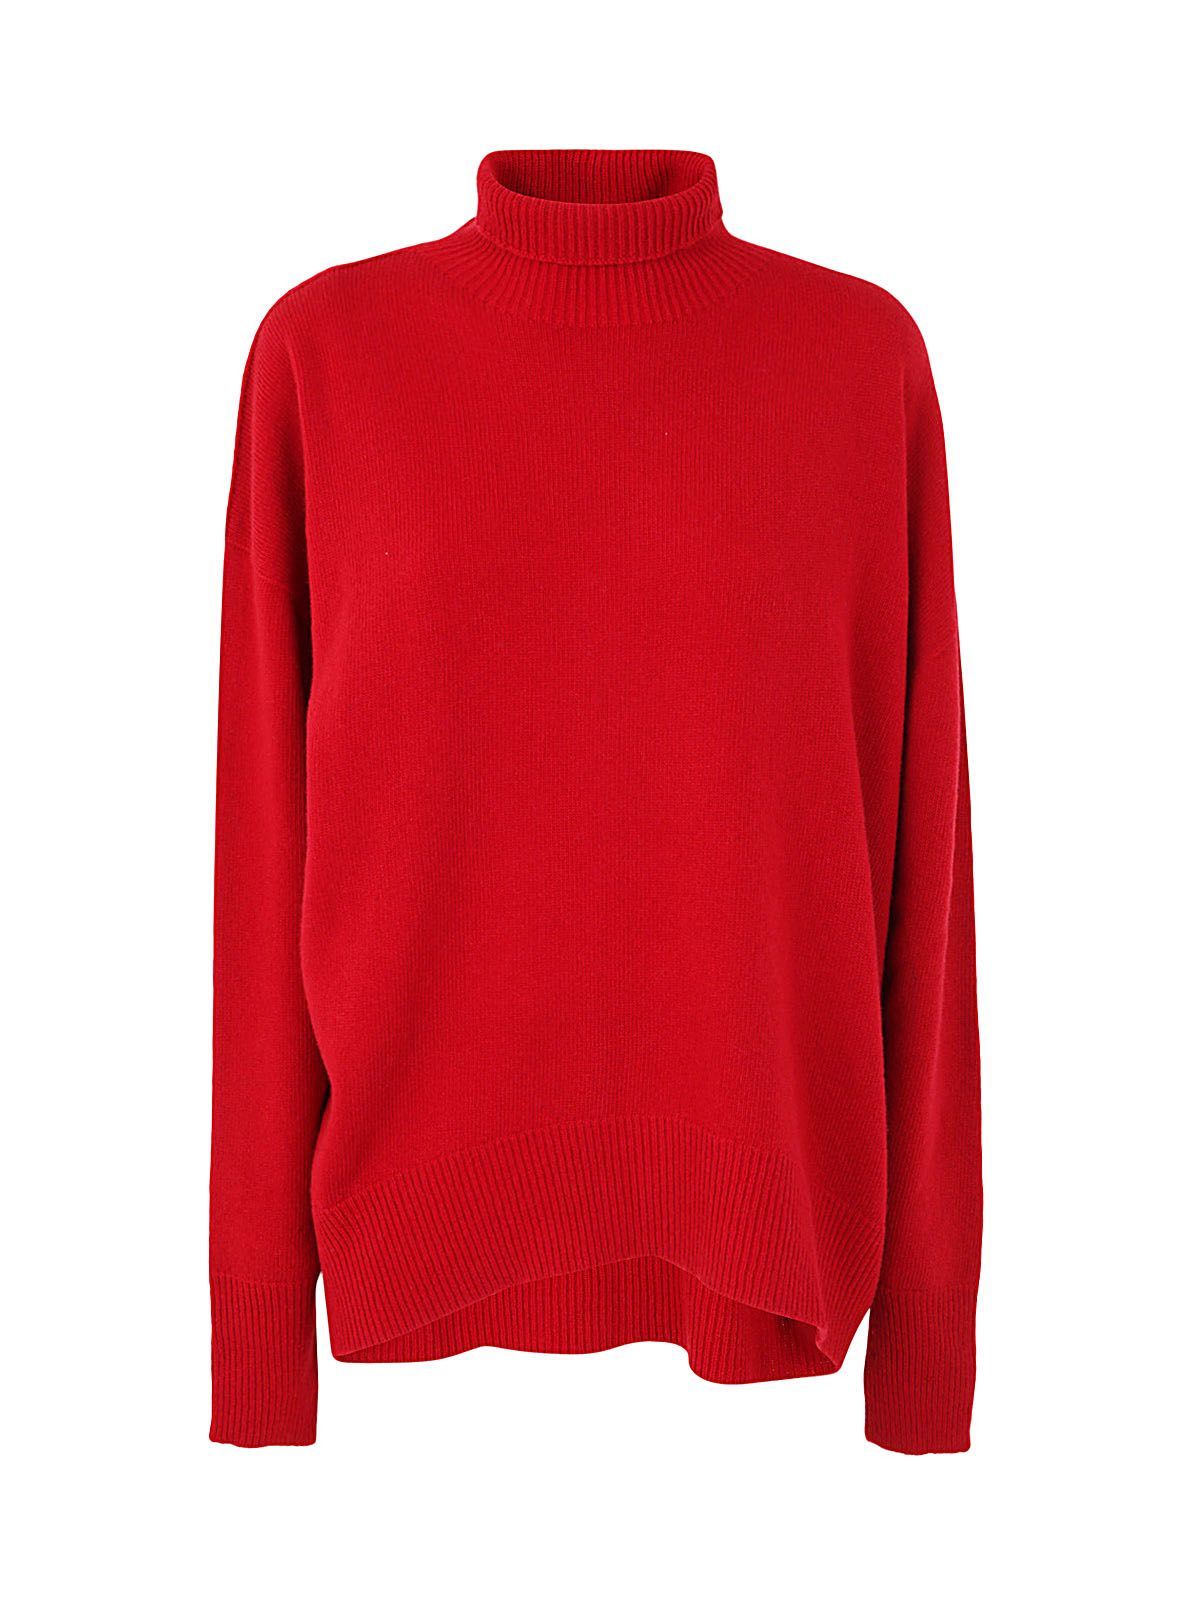 Shop Phiili No Sewing Turtleneck Pullover